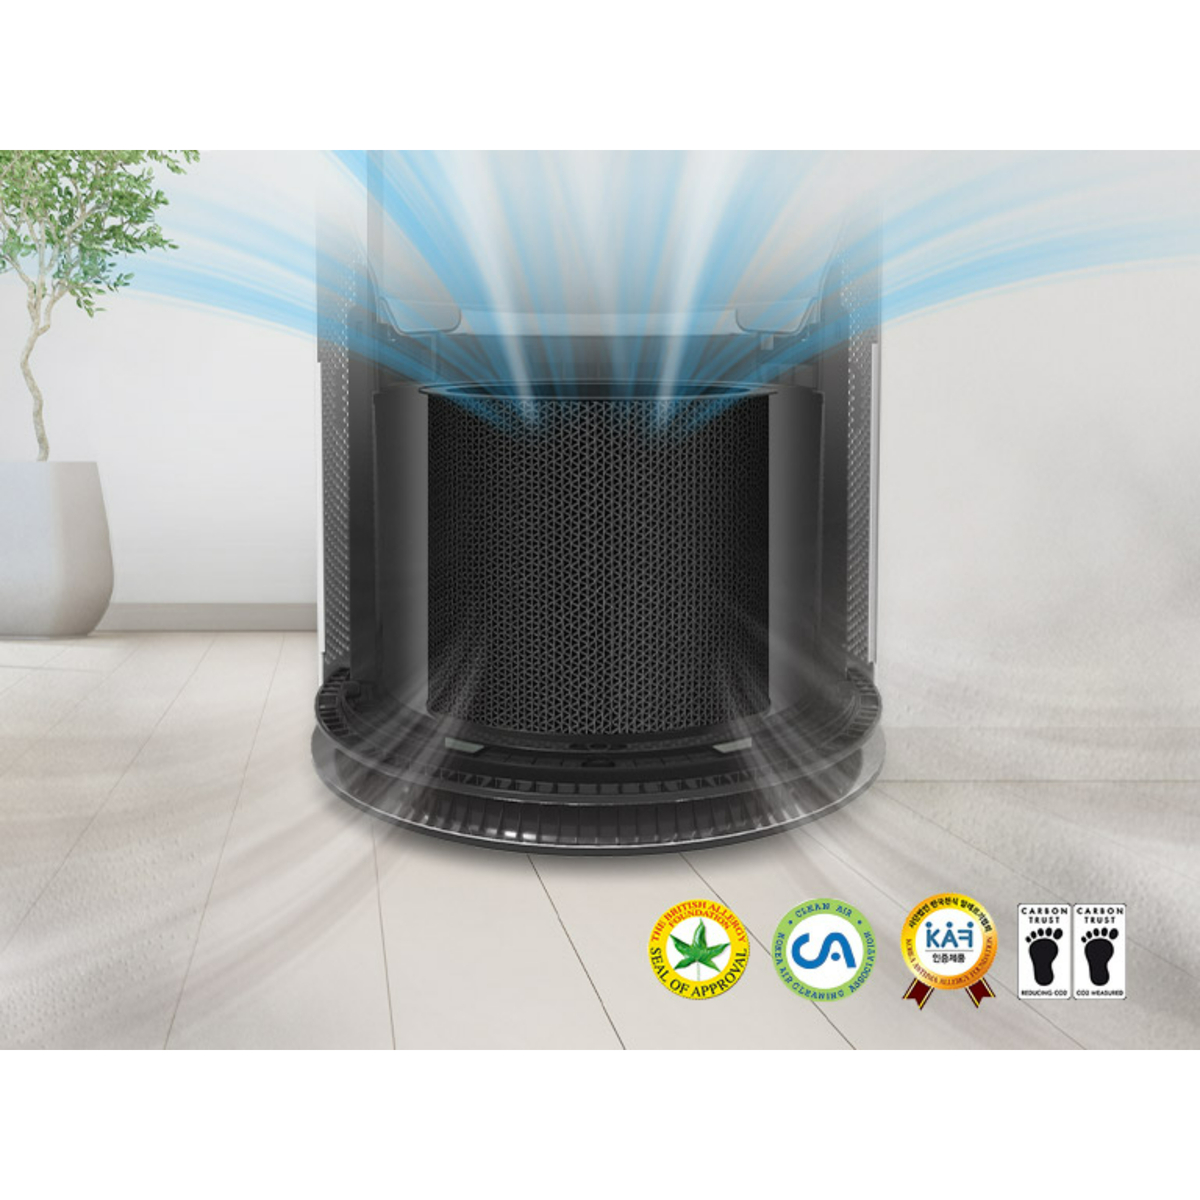 LG PuriCare 360 Degree Air Purifier, White, AS65GDWH0